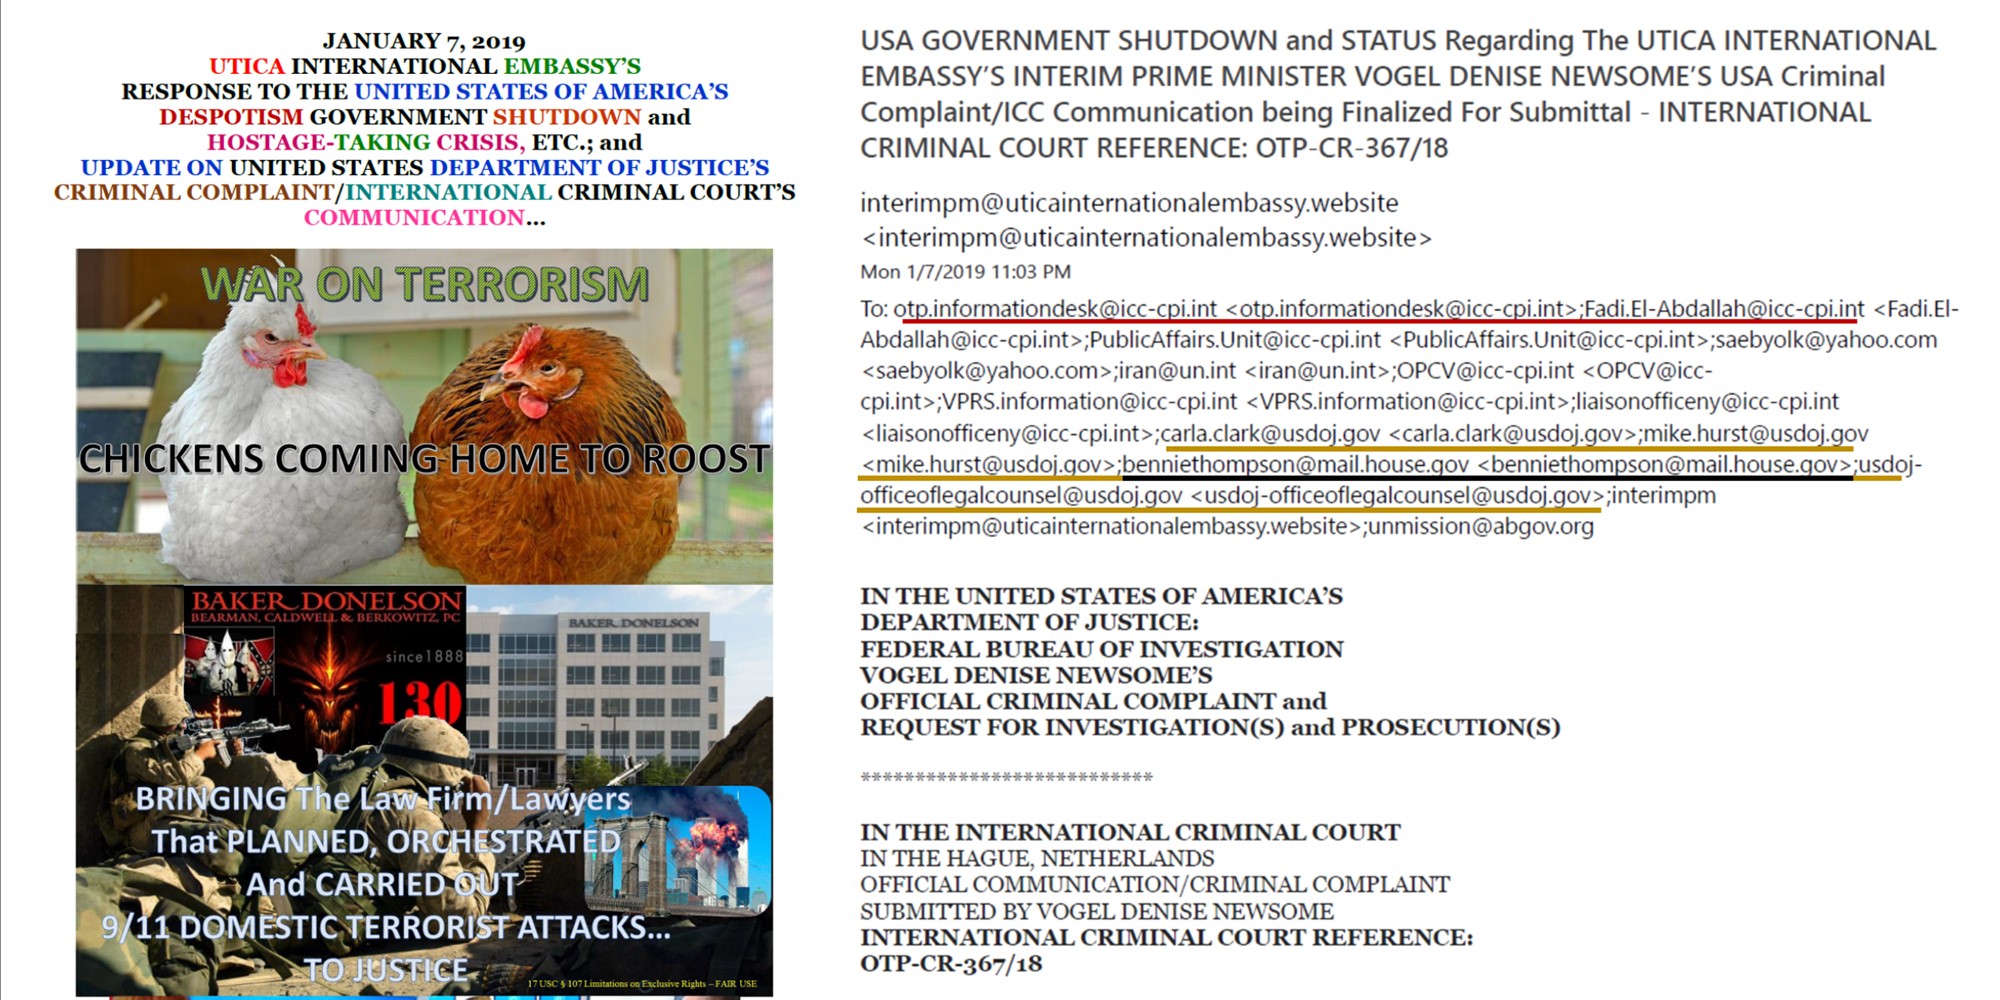 010719 Email Confirmation Response To USA Shutdown Status Of UIE Criminal Complaint Against USA